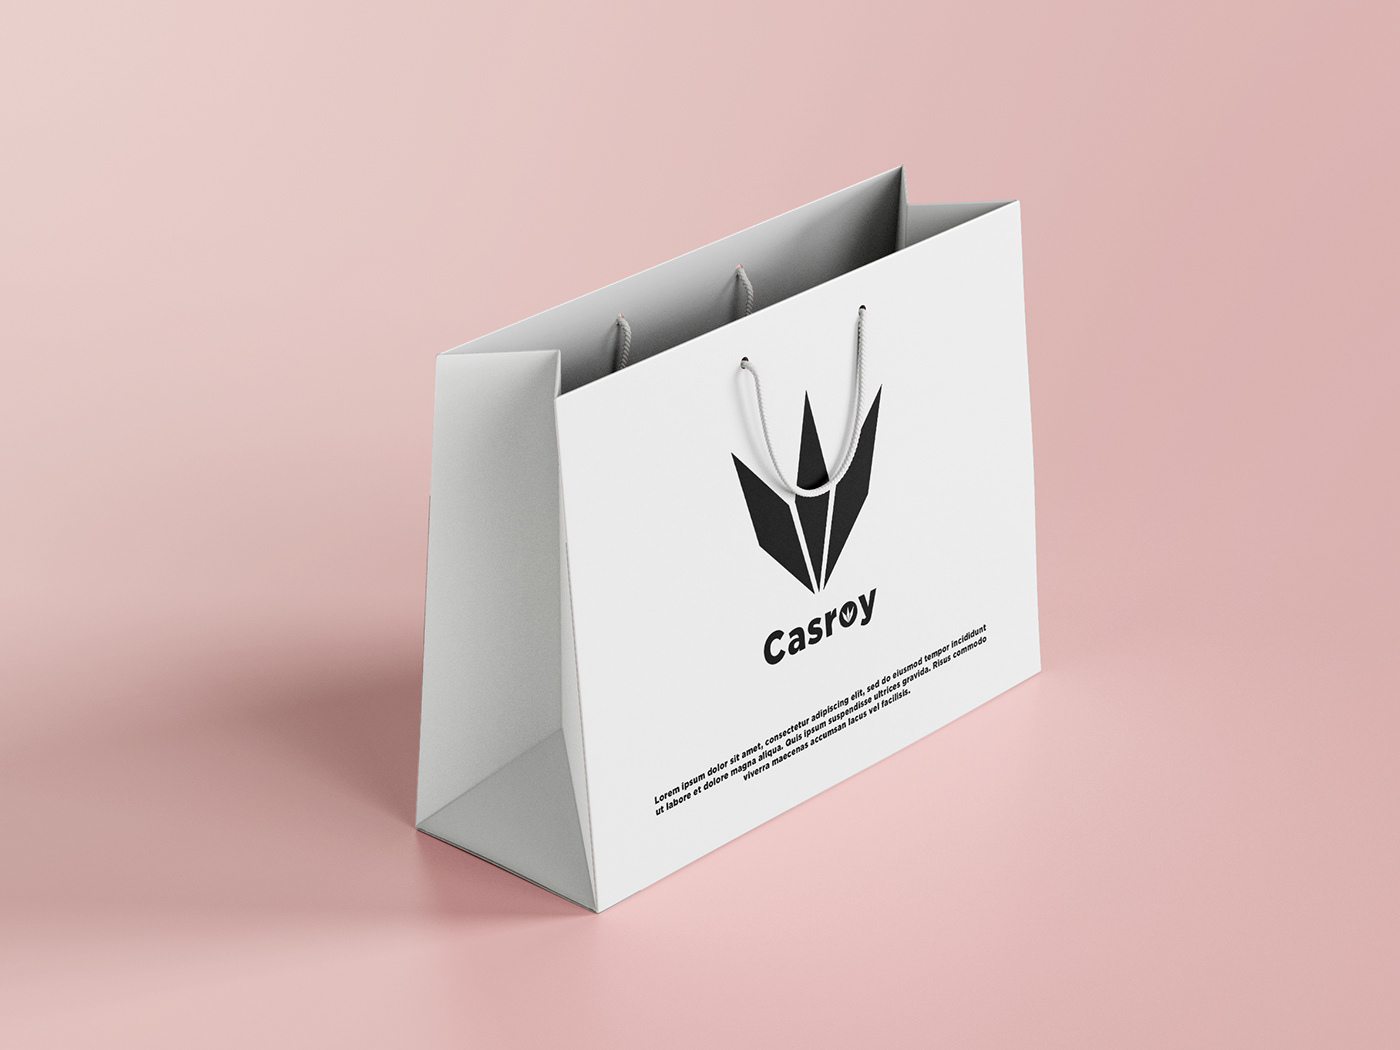 Image contains: Chic shopping bag design for Casroy brand by Humza DZN.
